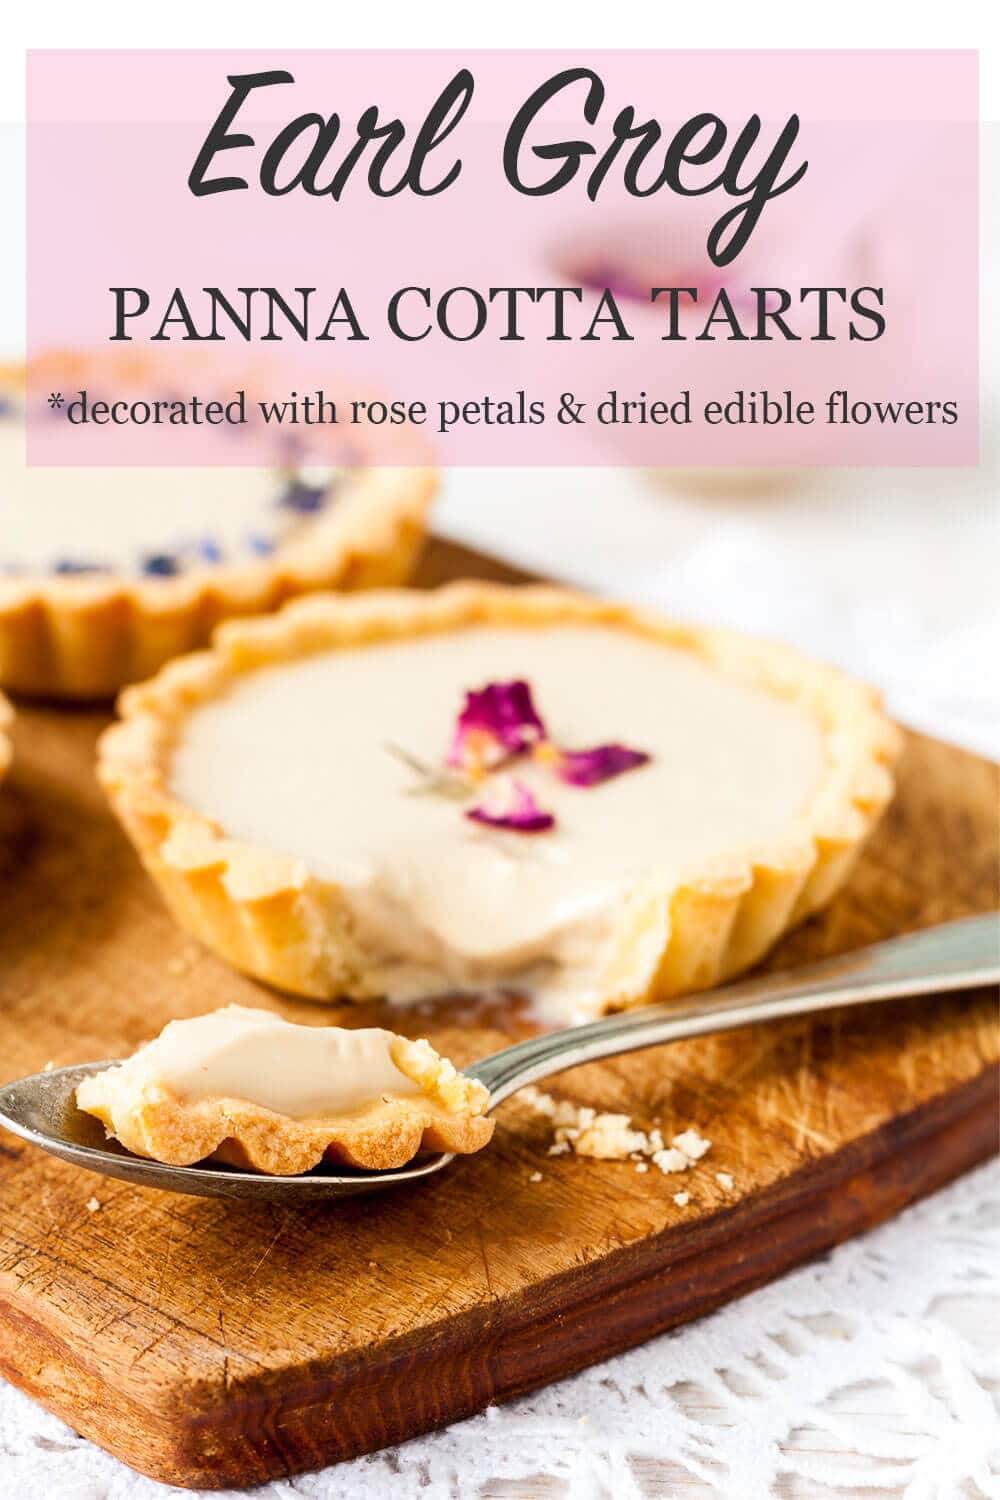 Earl Grey panna cotta tart topped with dried rose petals and cut into with a fork, served on a wooden cutting board placed on a white lace doily